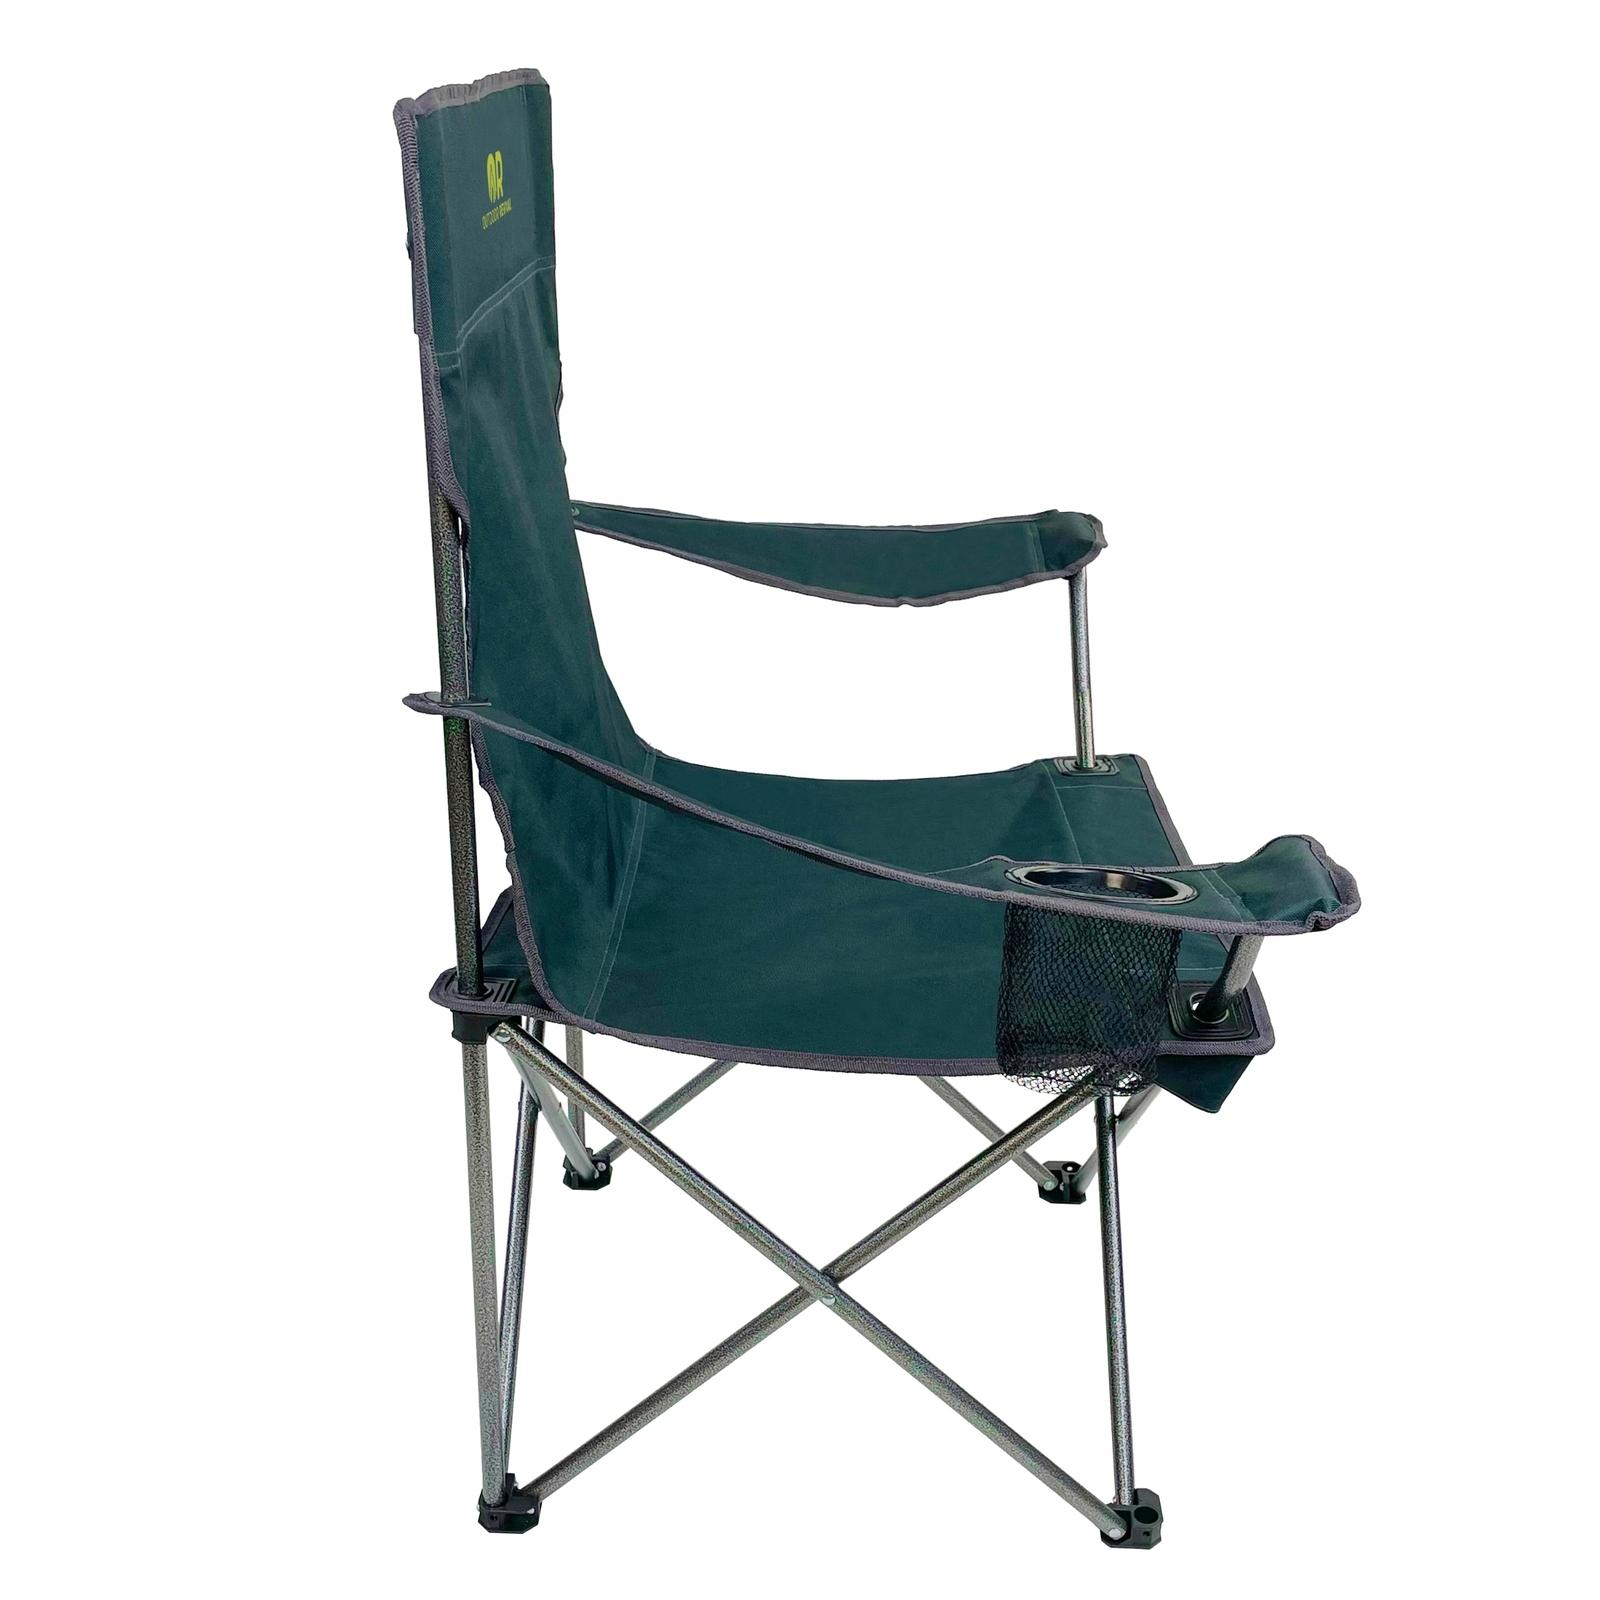 Outdoor Revival Everyday Quad Chair- side view